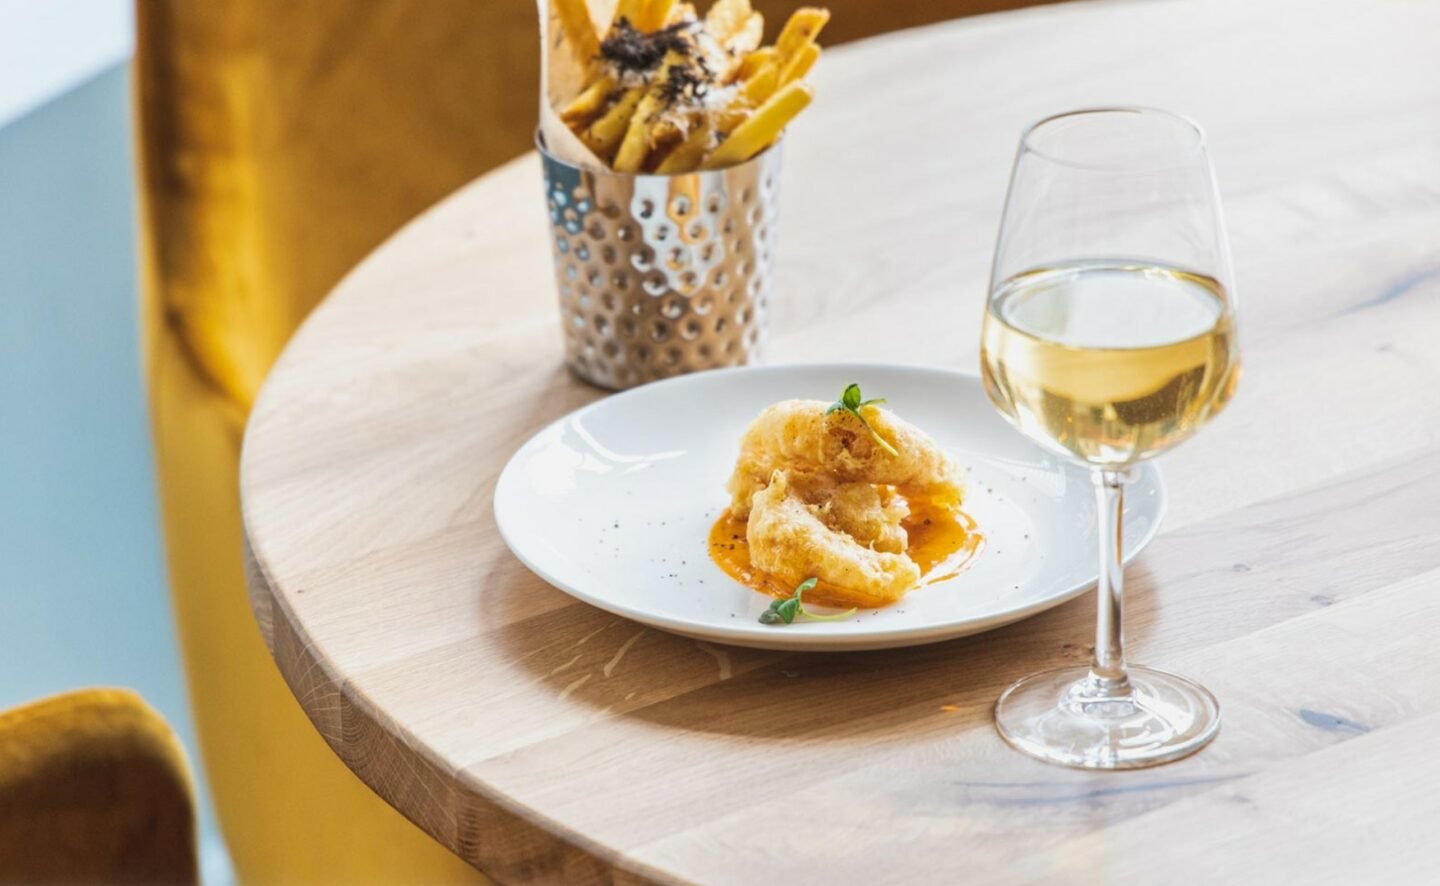 Number Eight: tempura prawns with a glass of white wine